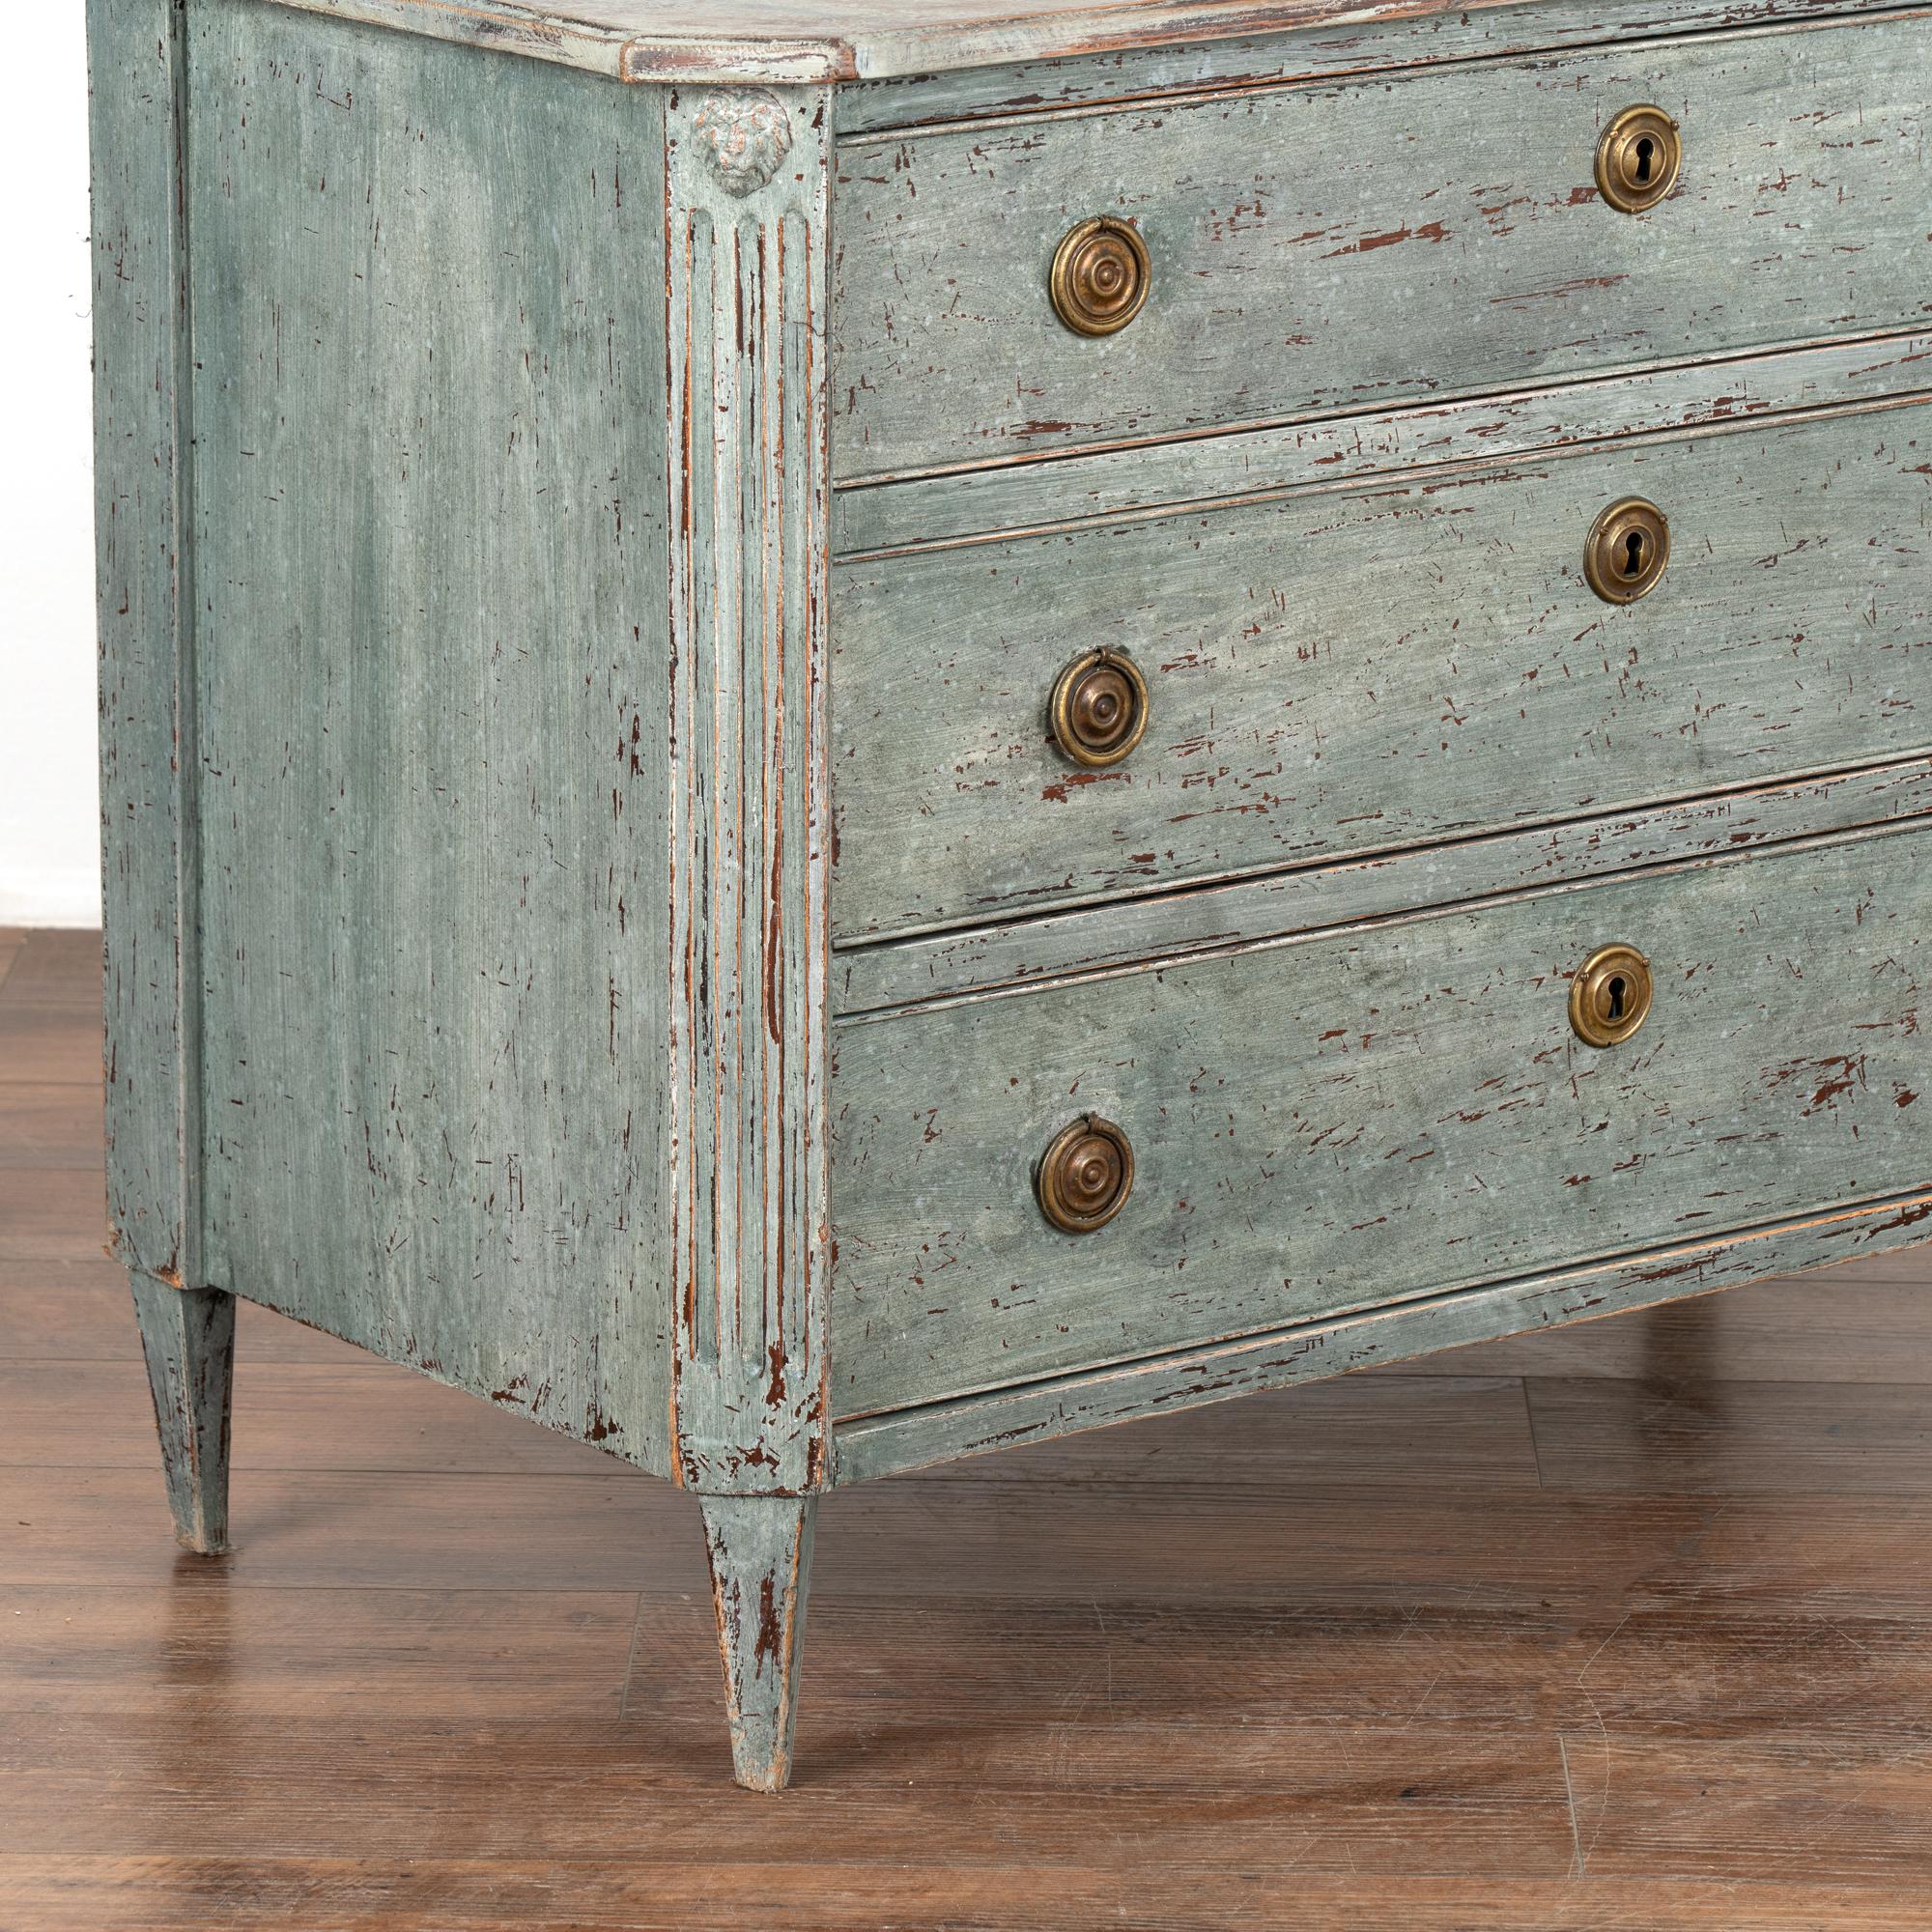 Brass Blue Painted Chest of Three Drawers, Sweden circa 1820-40